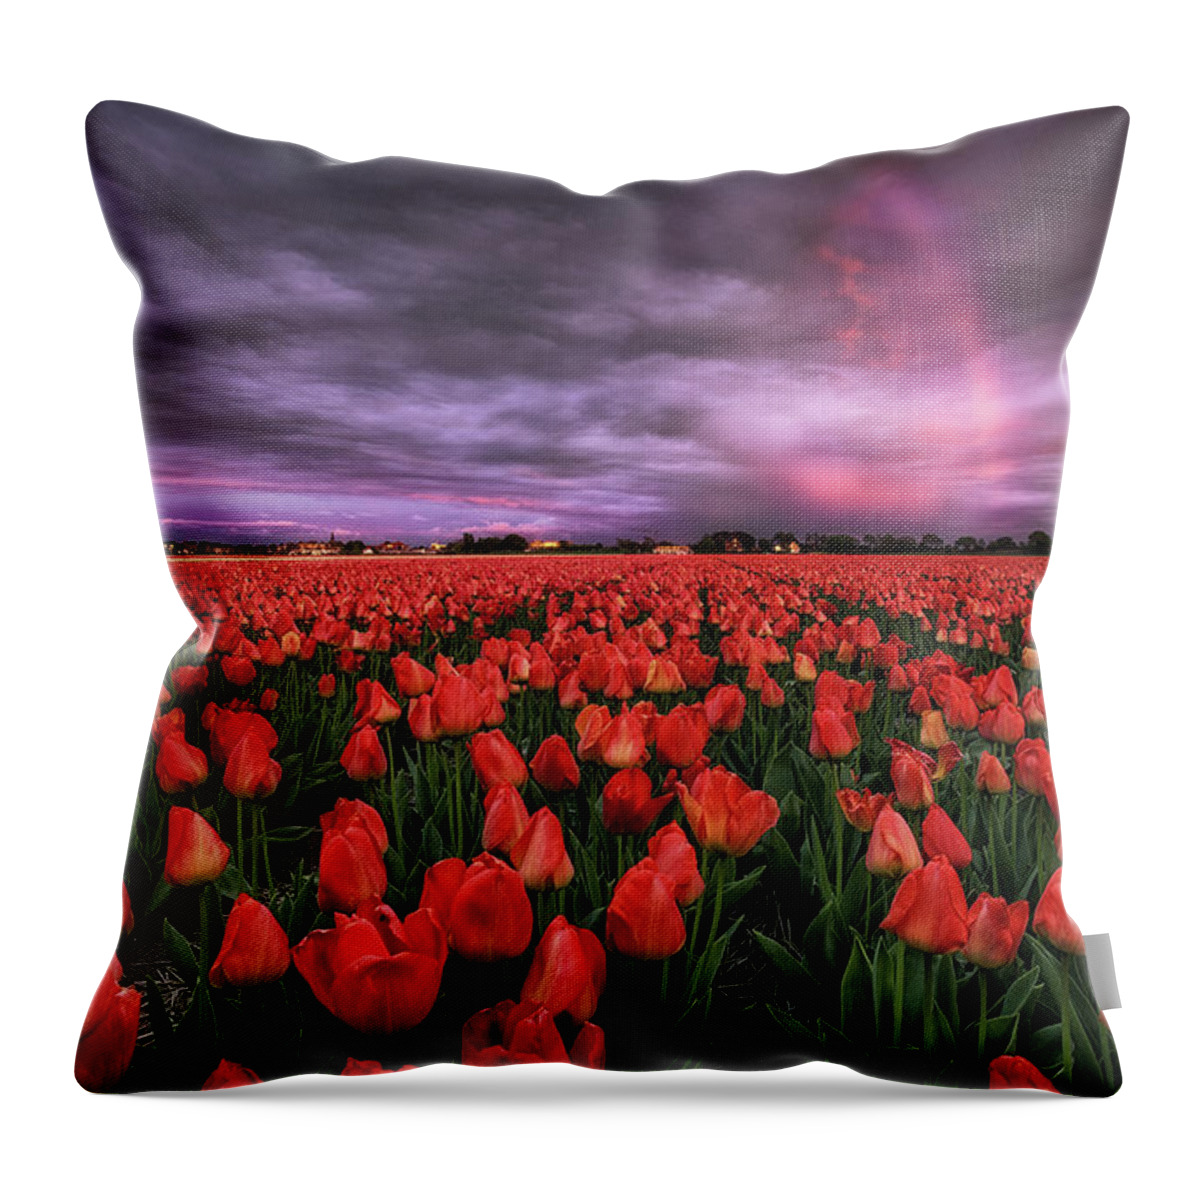 Landscape Throw Pillow featuring the photograph Rainbow by Jorge Maia